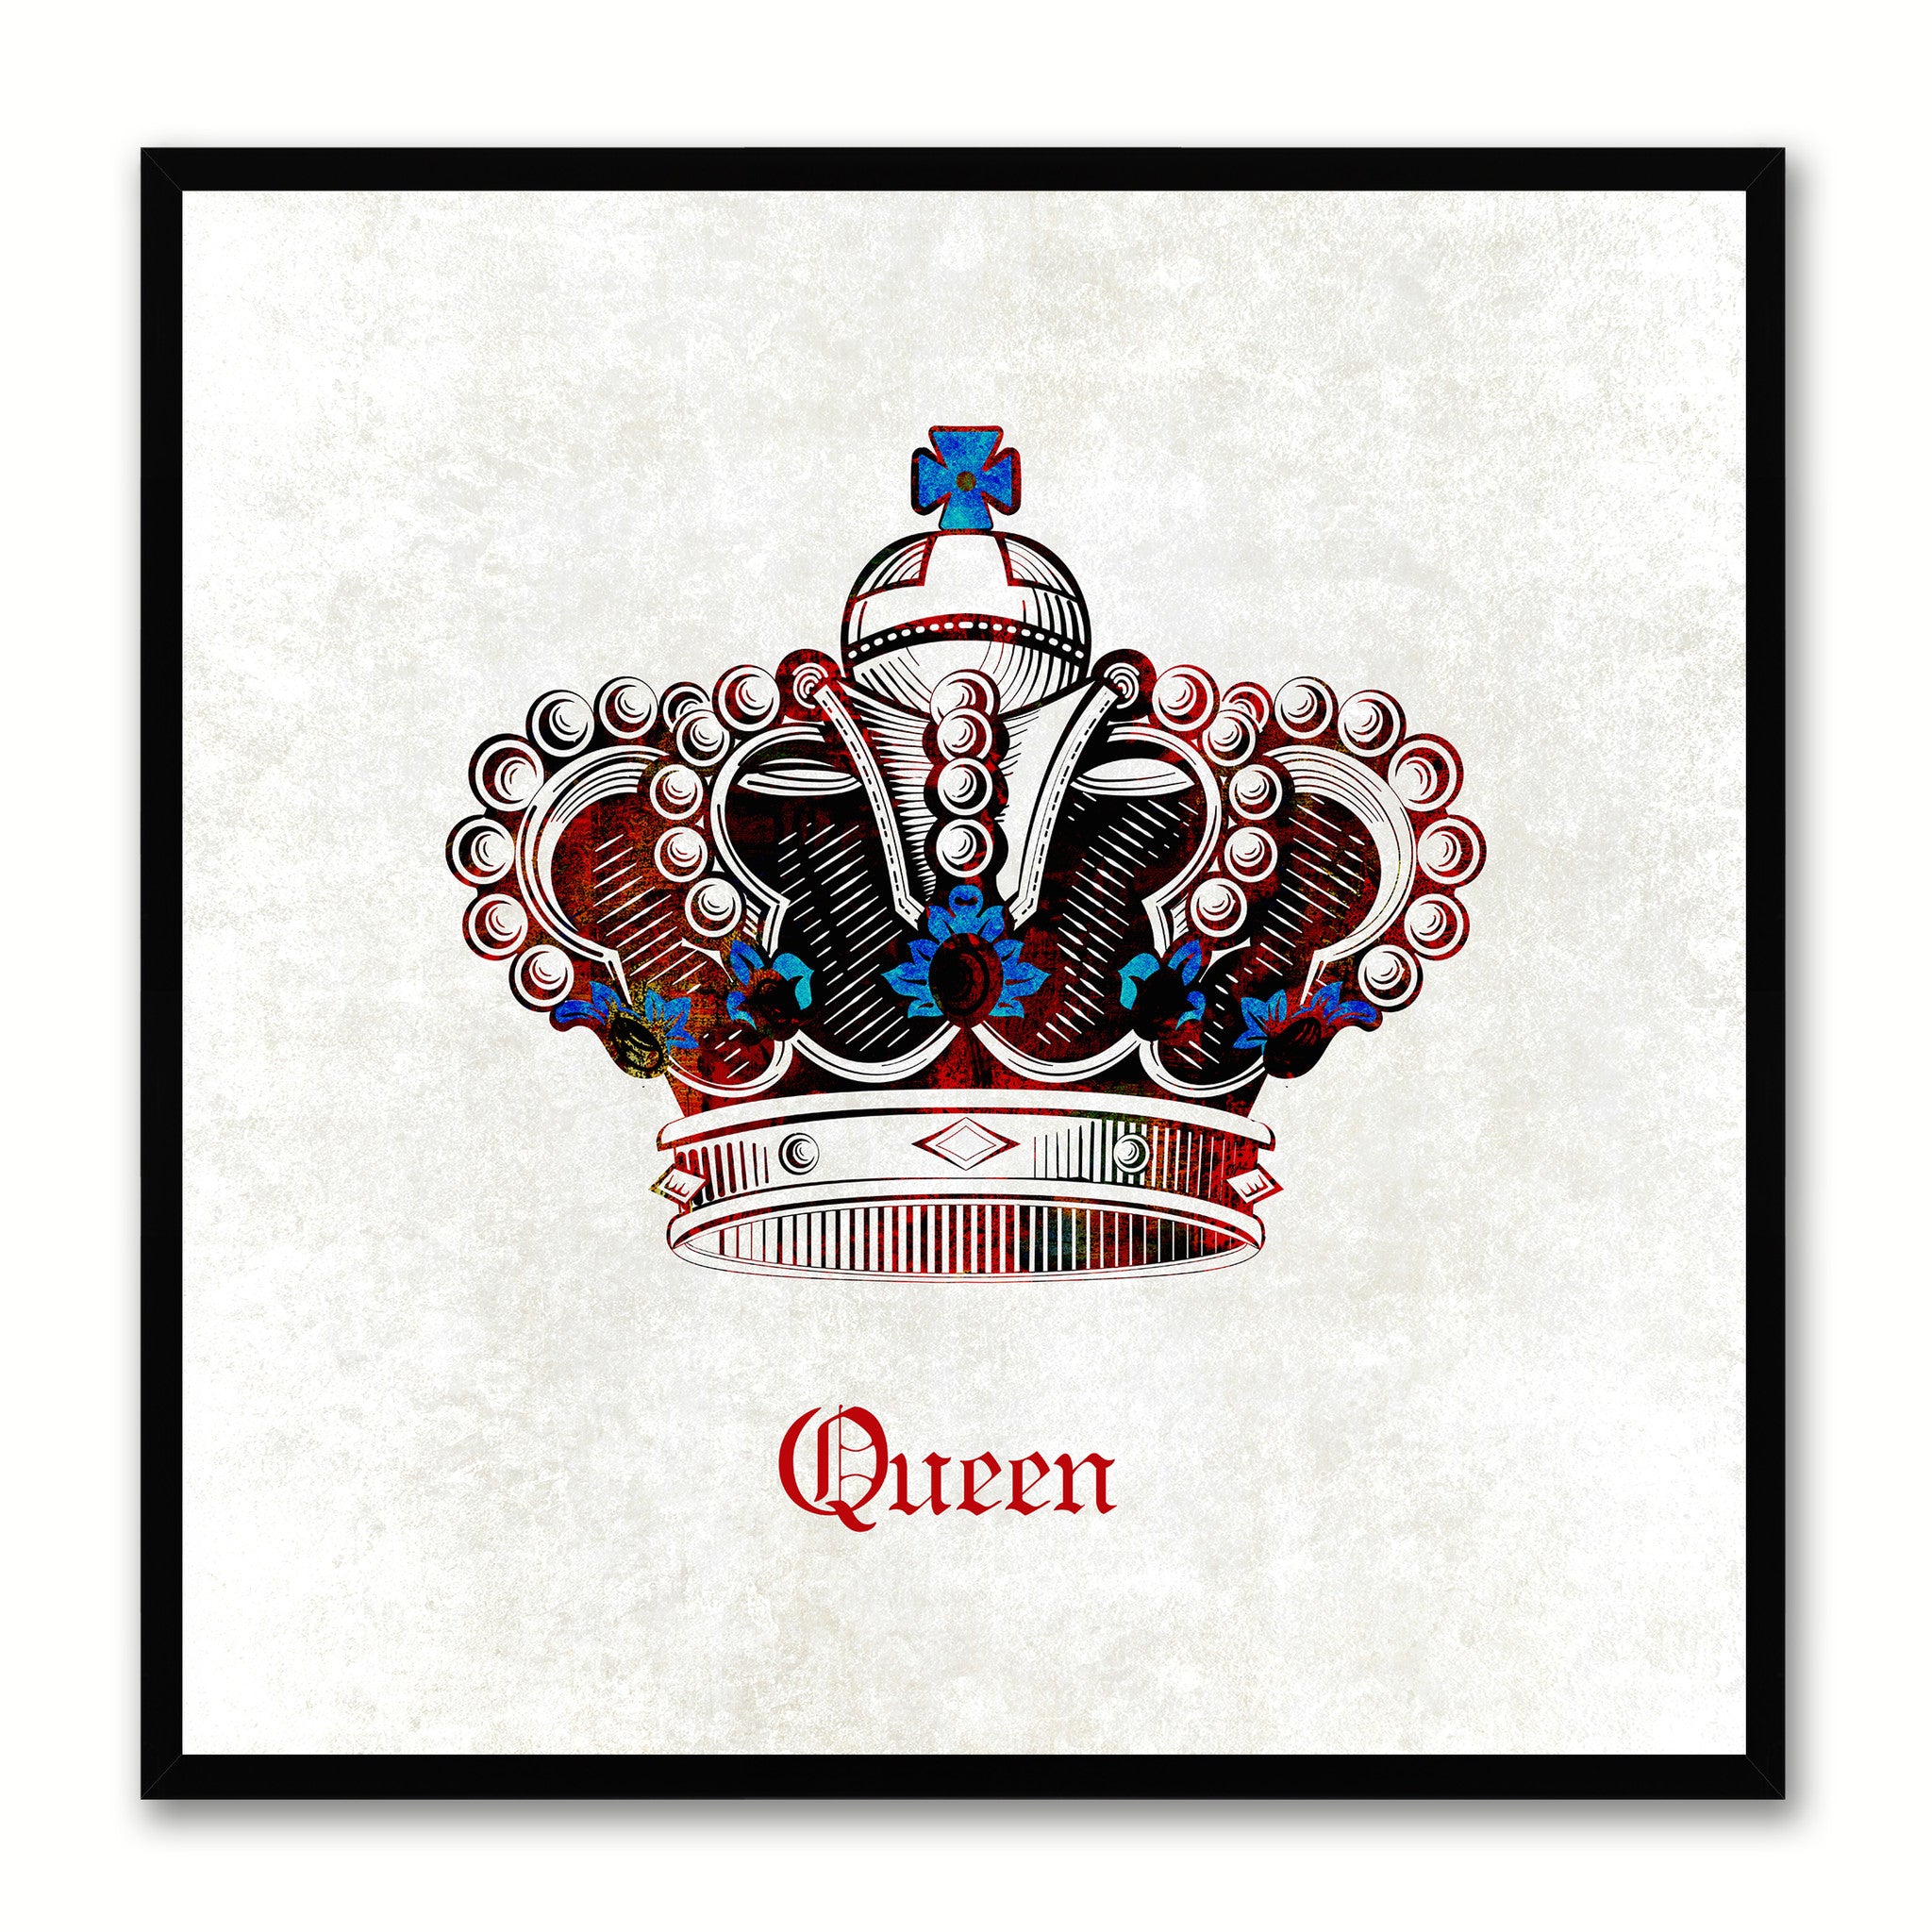 Queen White Canvas Print Black Frame Kids Bedroom Wall Home Décor